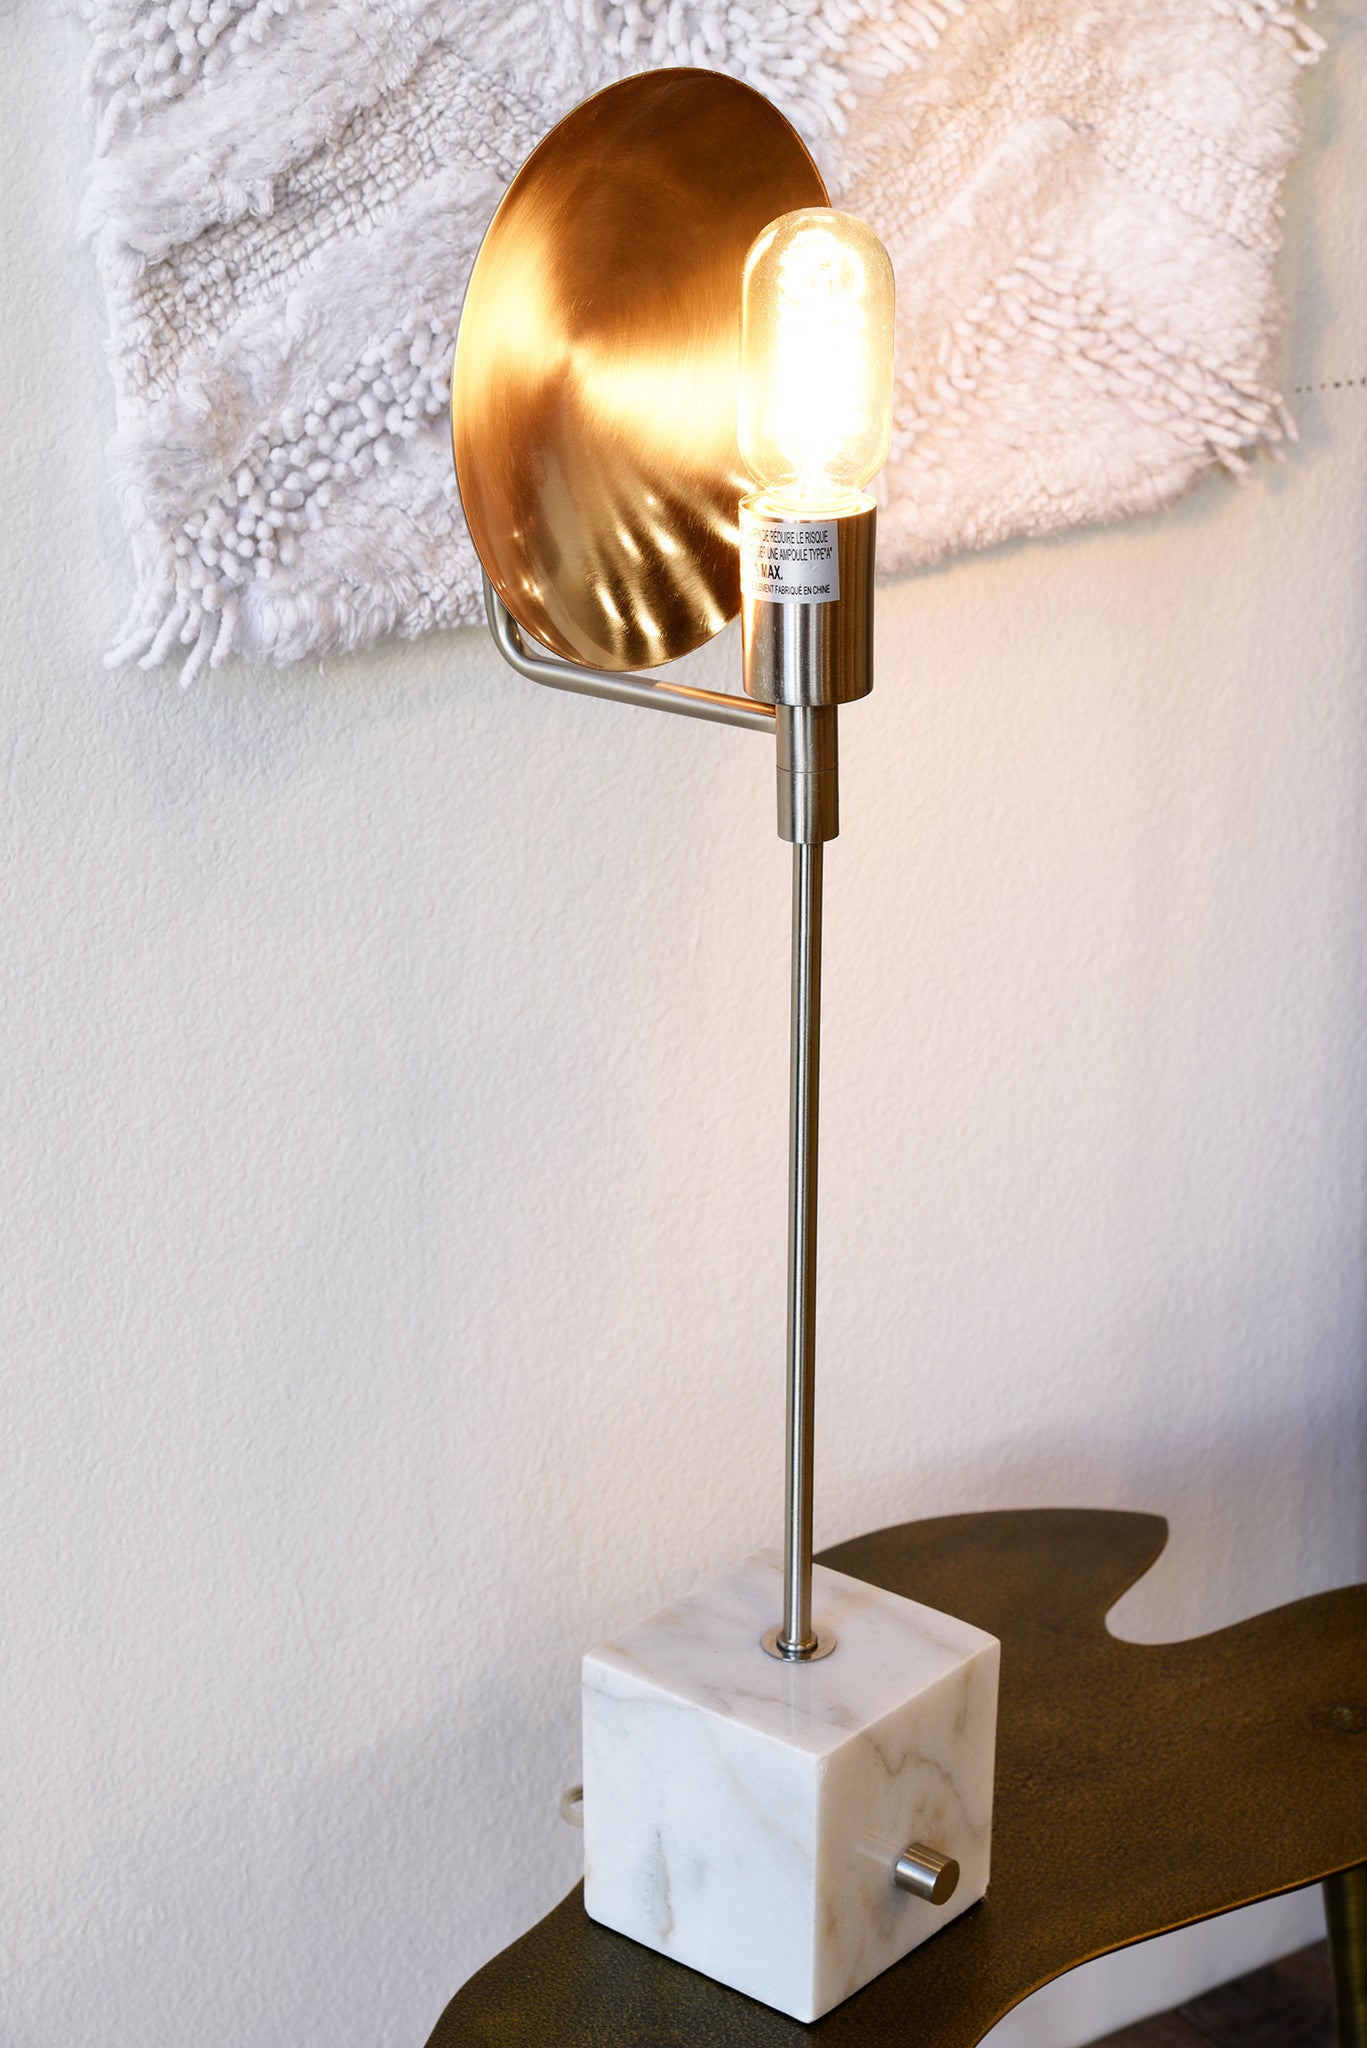 Marble and Nickel Edison Reflector Table Lamp